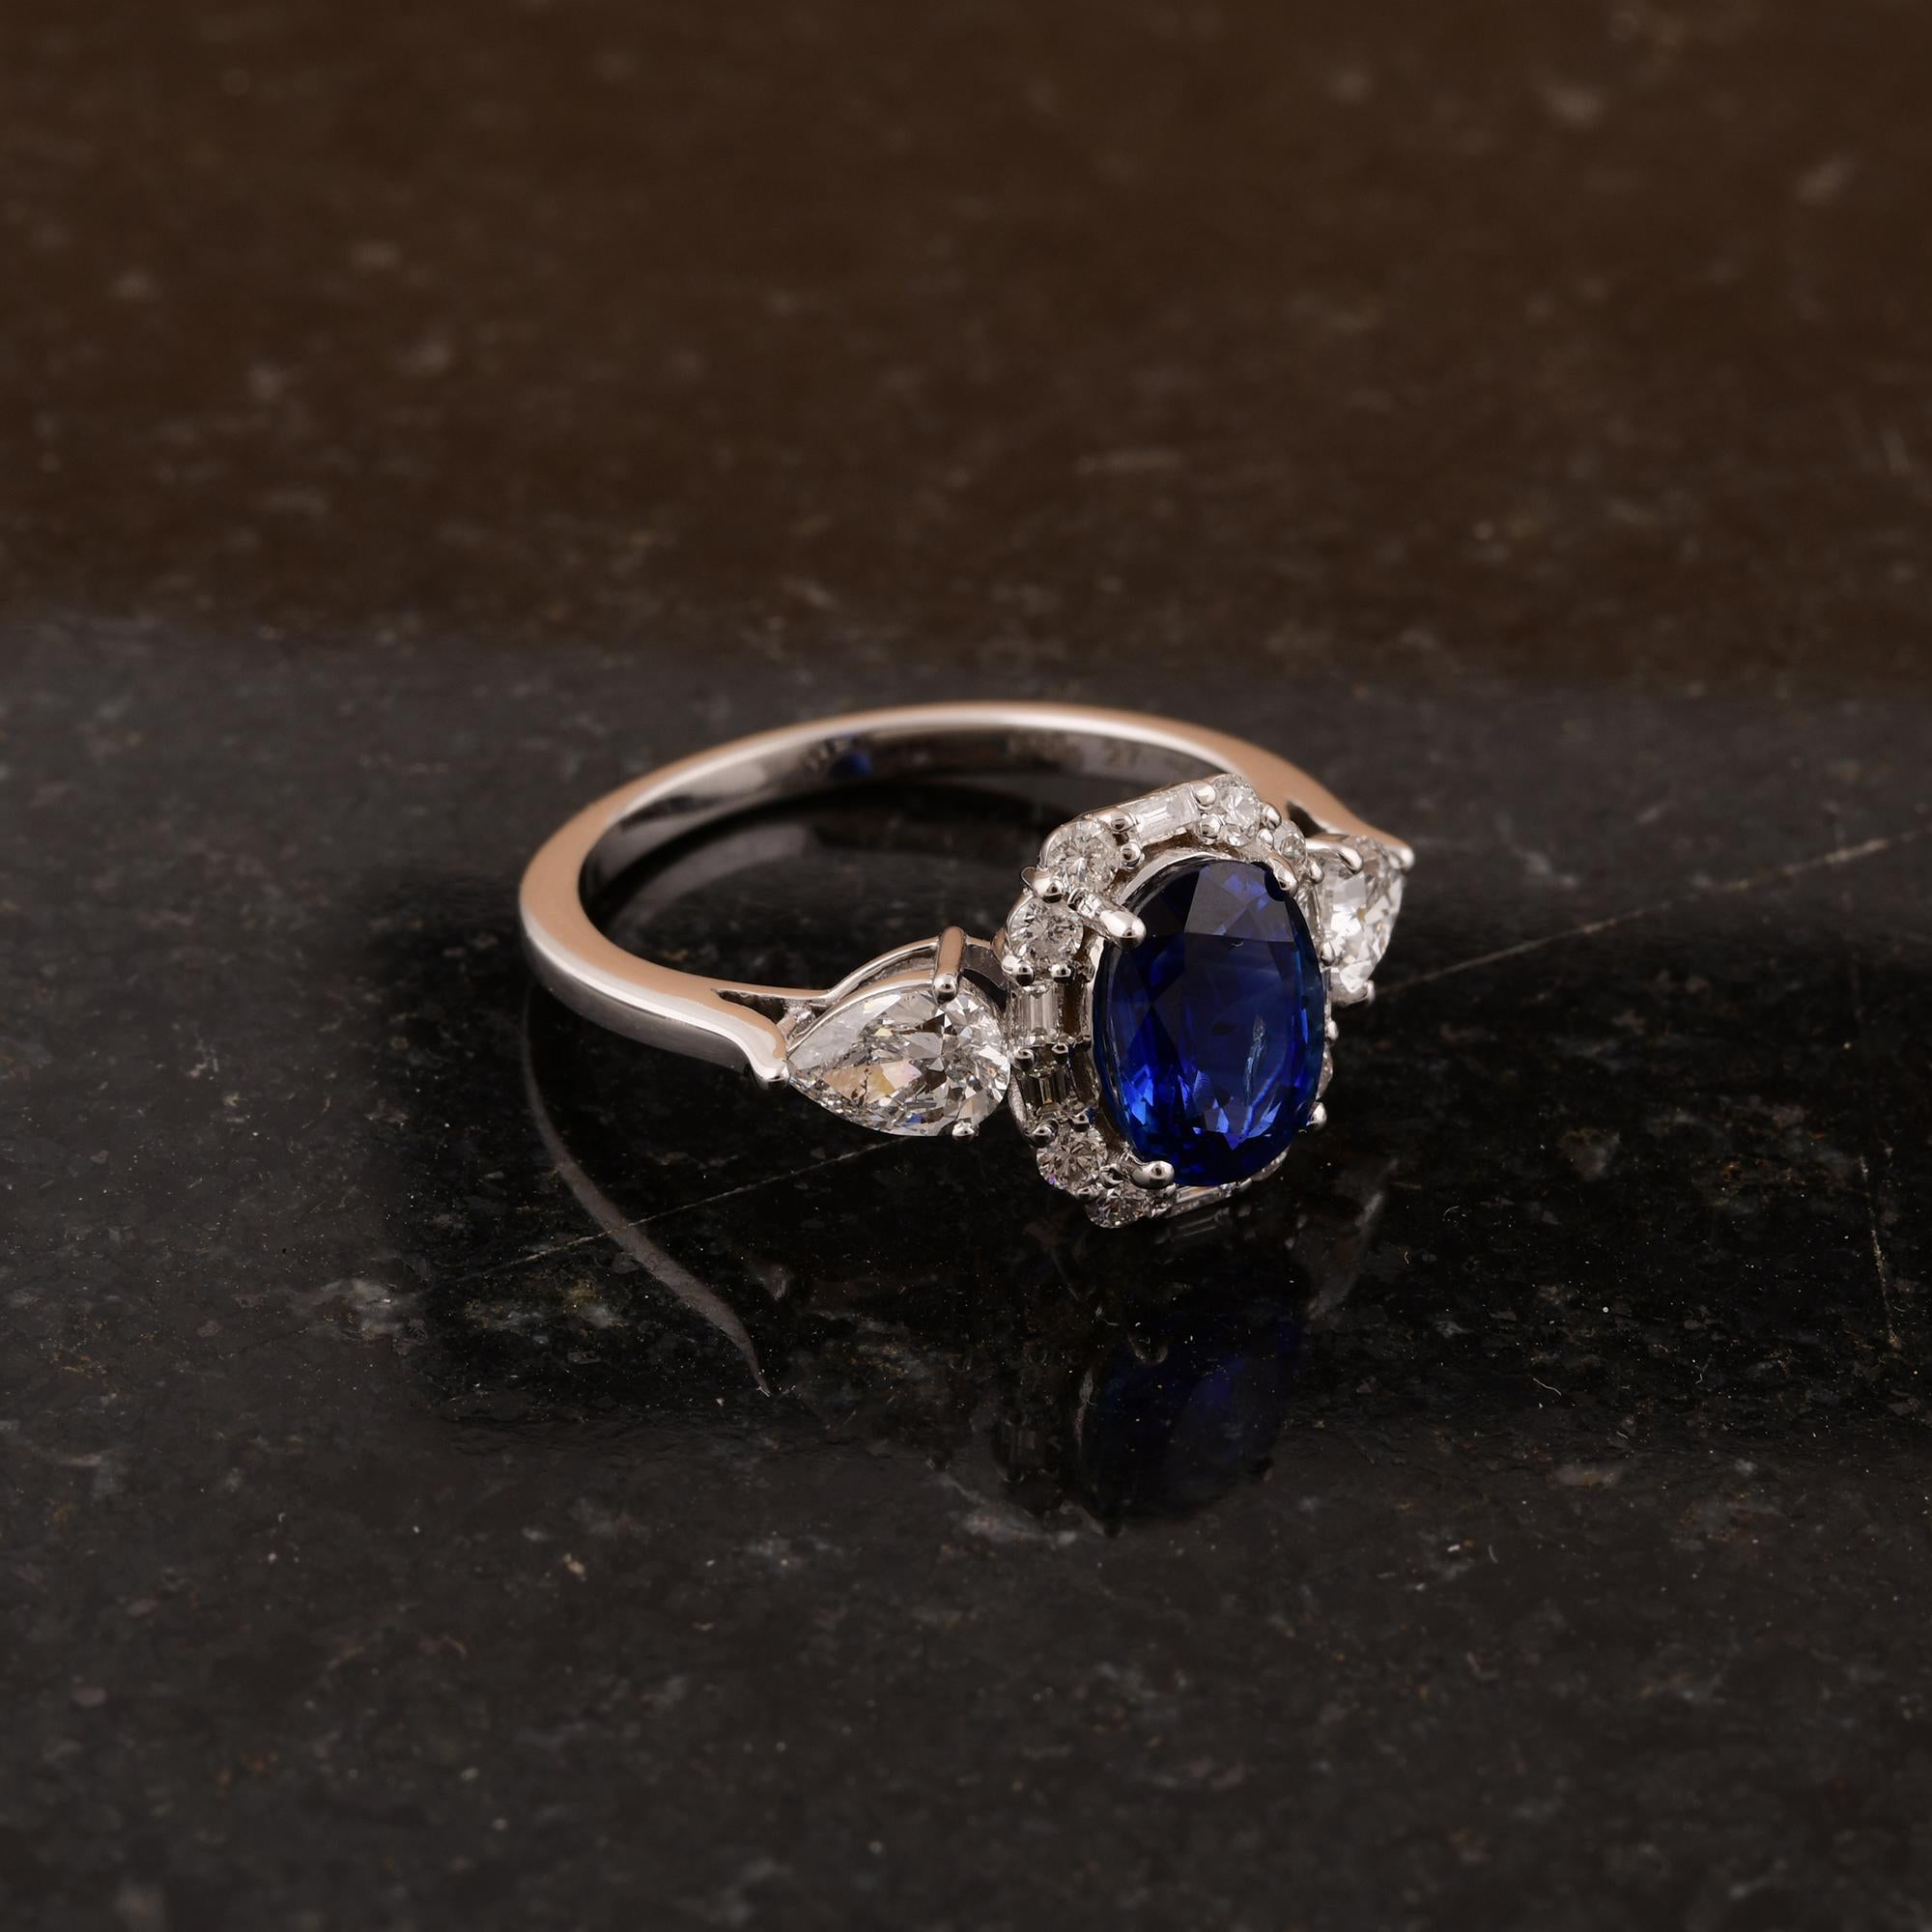 Women's Real Blue Sapphire Cocktail Ring SI Clarity HI Color Diamond 14 Karat White Gold For Sale